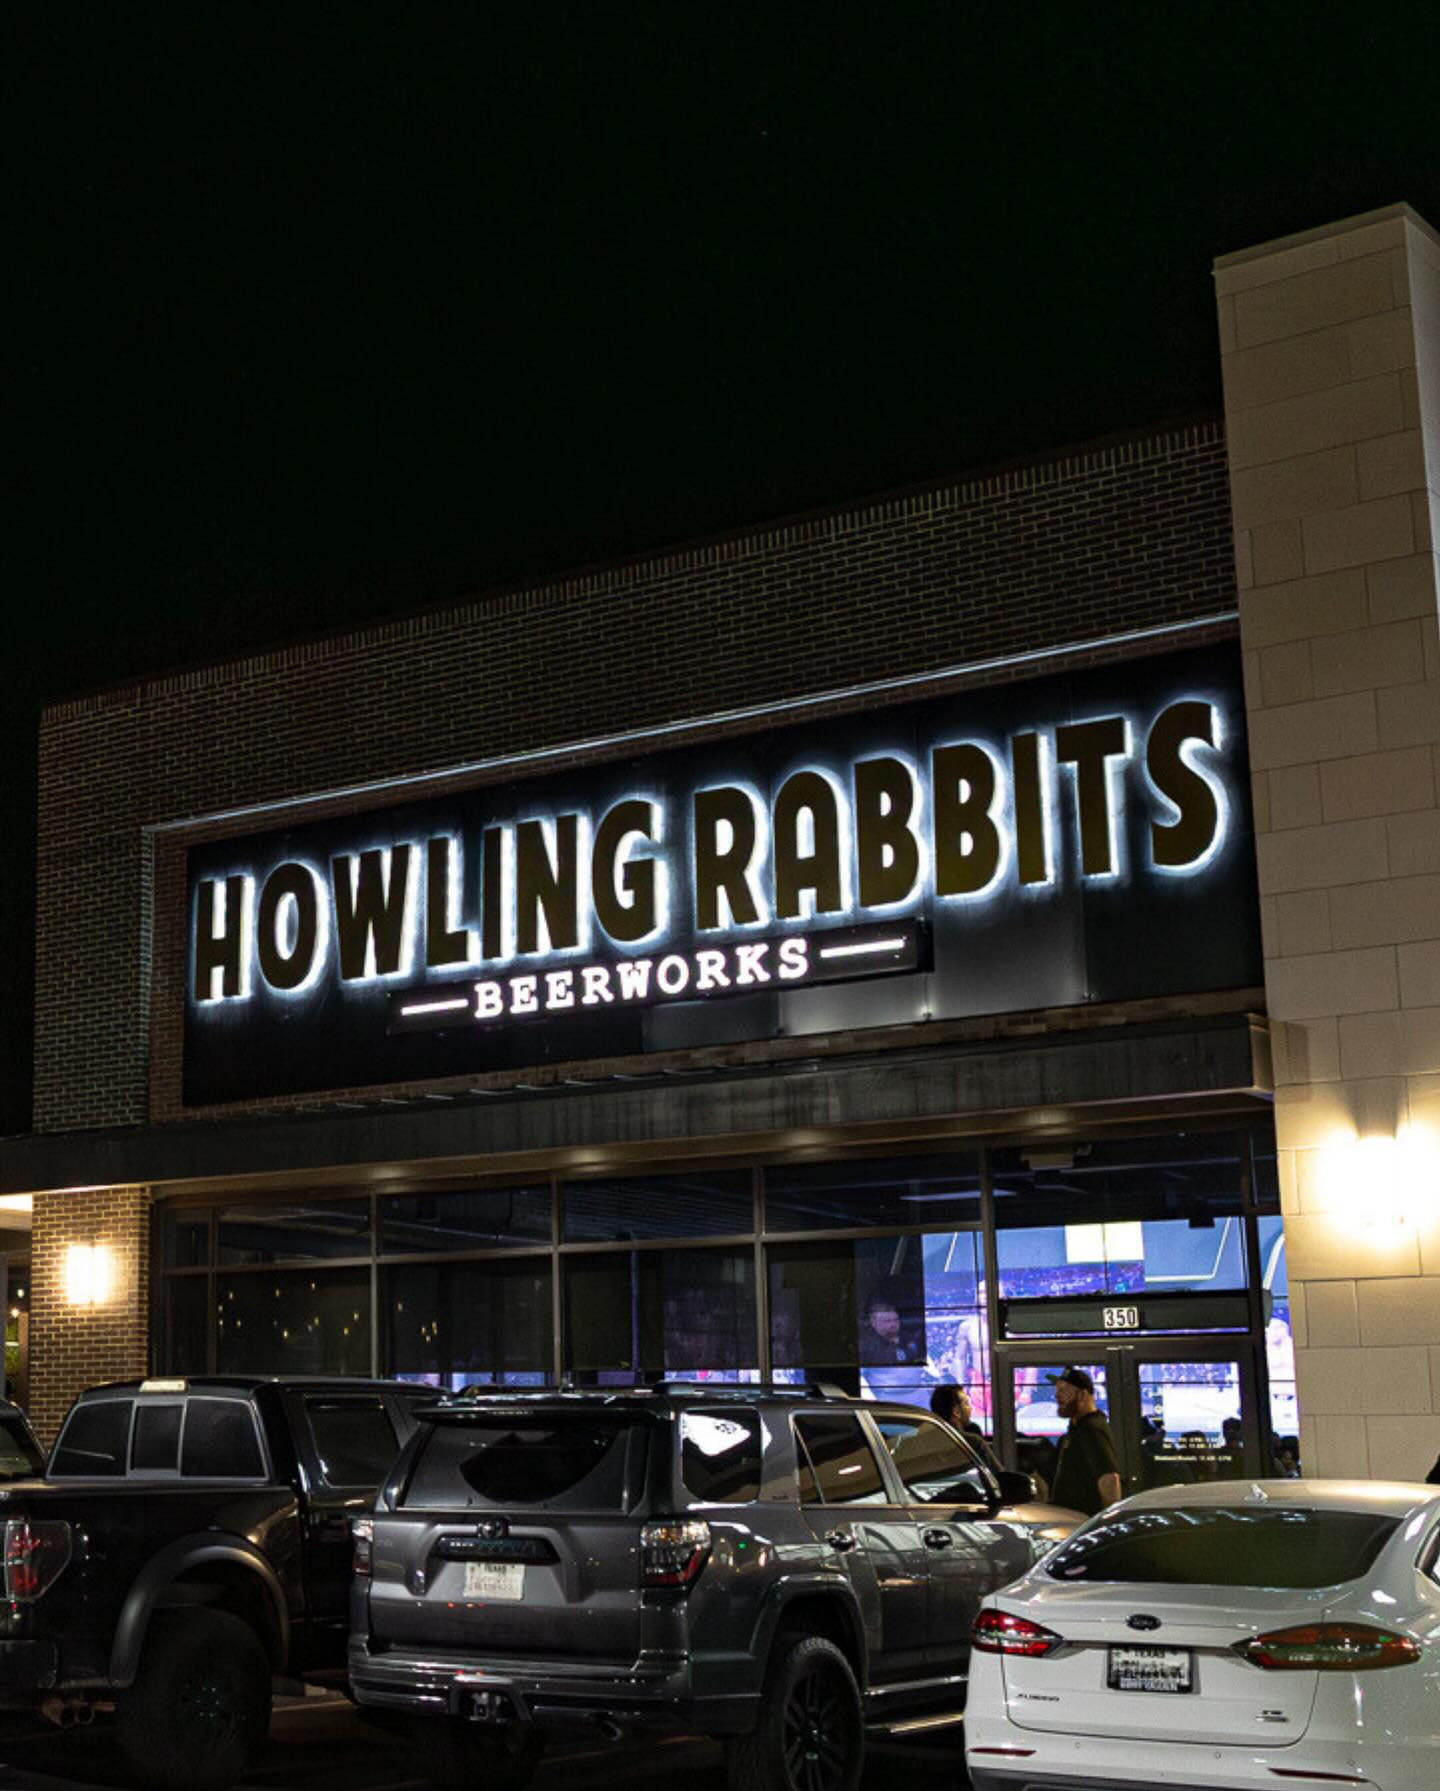 Howling Rabbits Beerworks